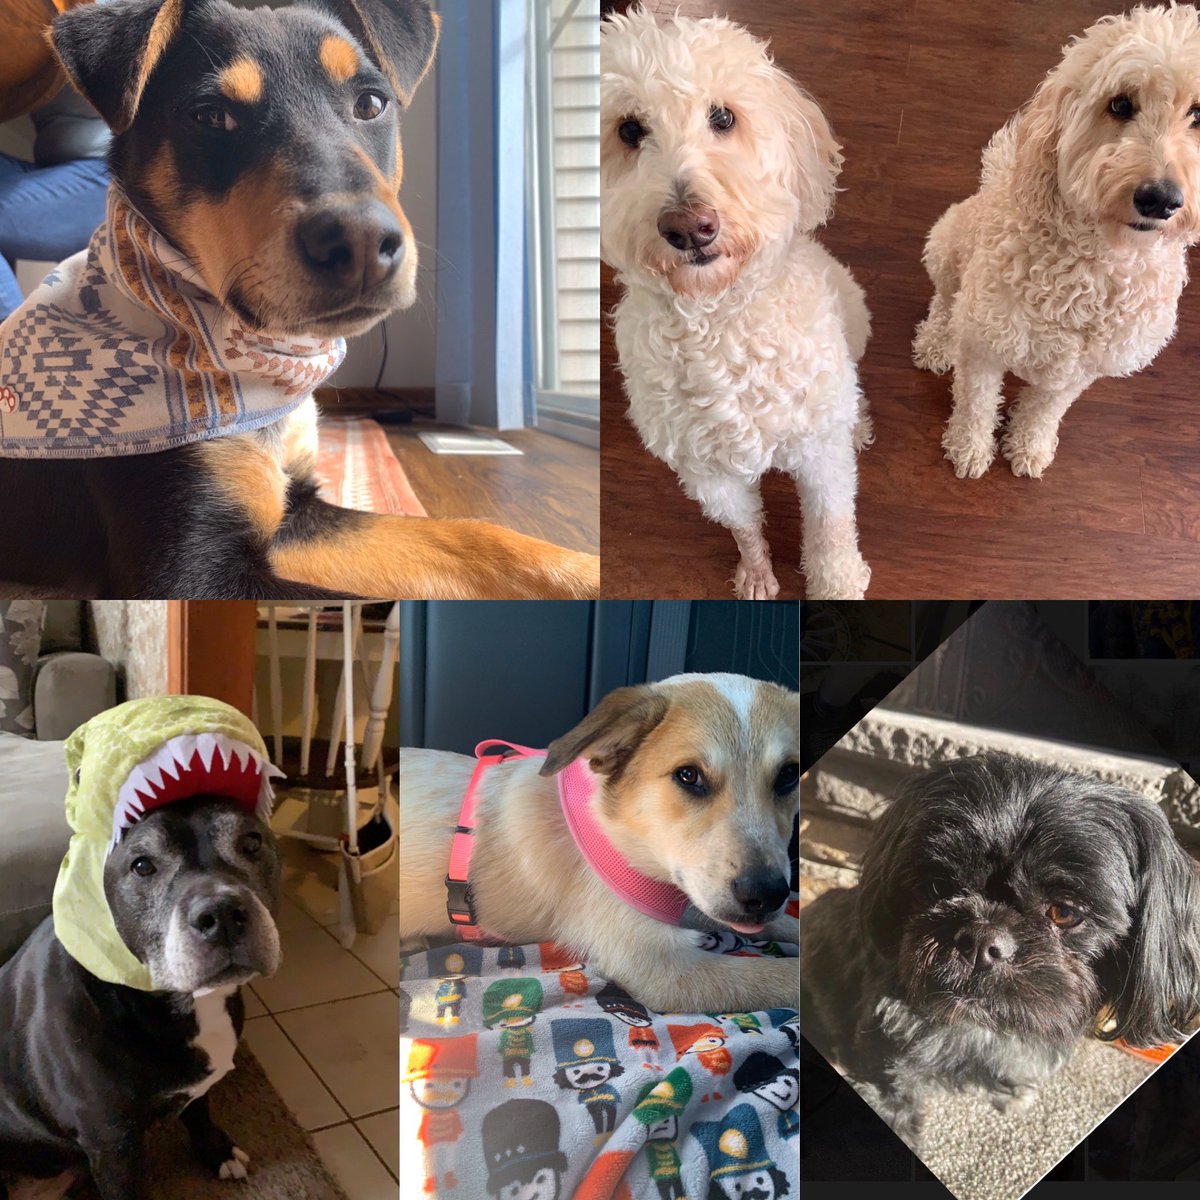 For Pet Therapy Day, here are the Counseling Office pups! #virtualkindnessweek